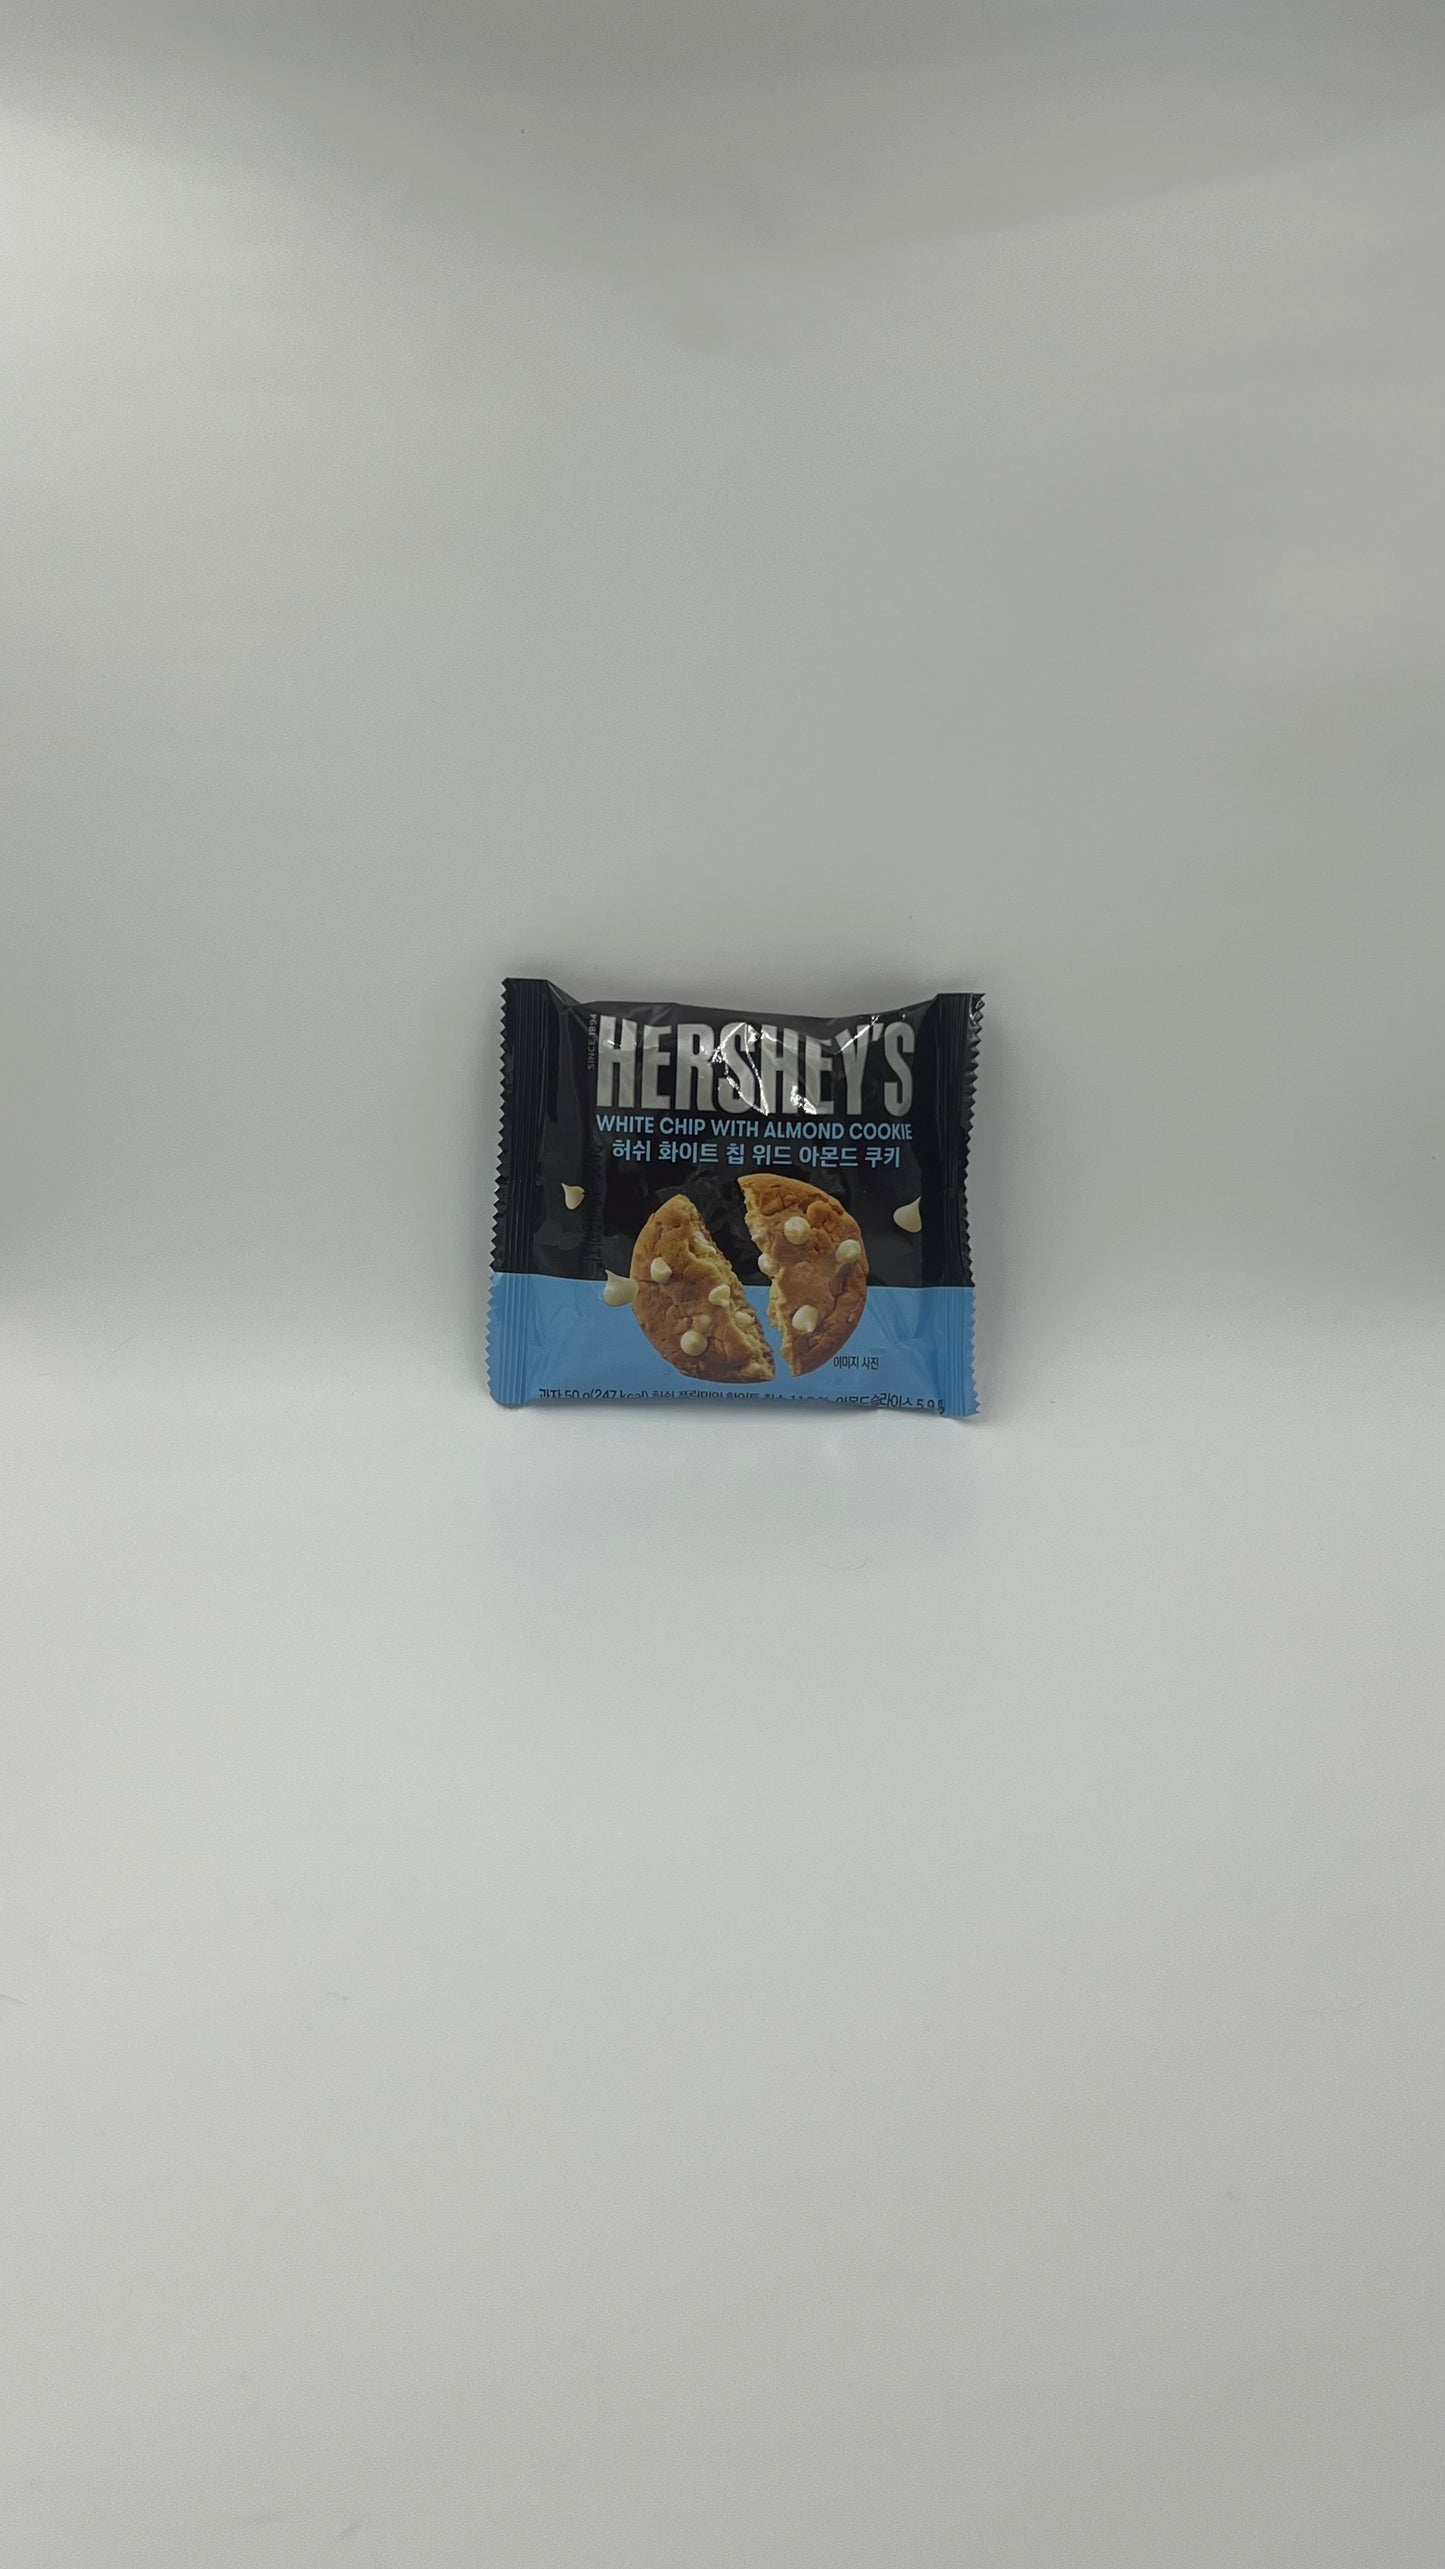 Hershey’s White Chip Almond Cookie